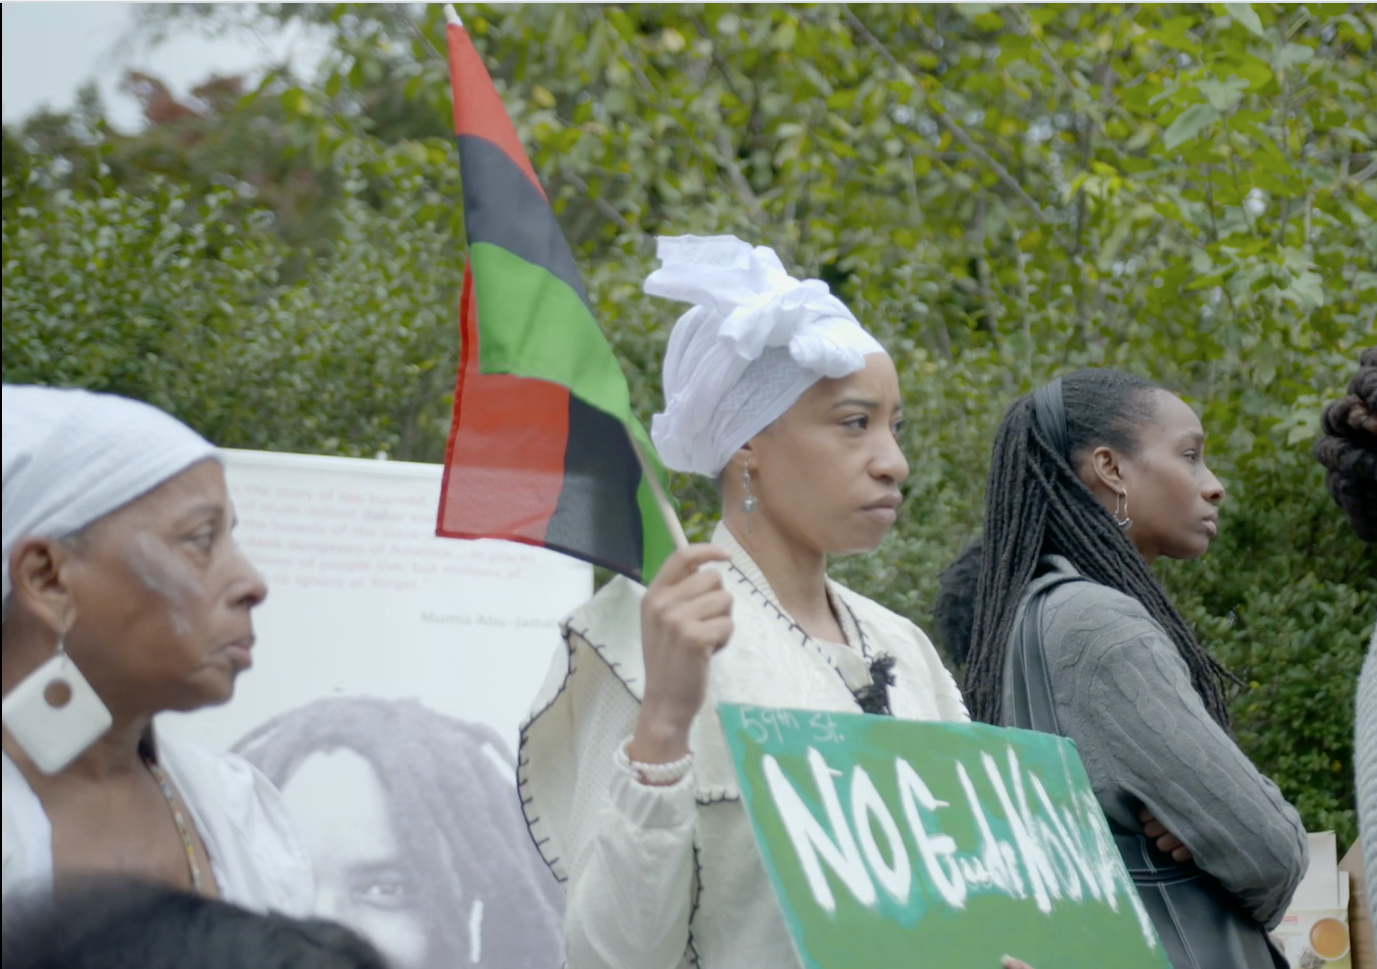 [WATCH] Activists Take Back The Street Named After The Black Mayor Who Bombed MOVE